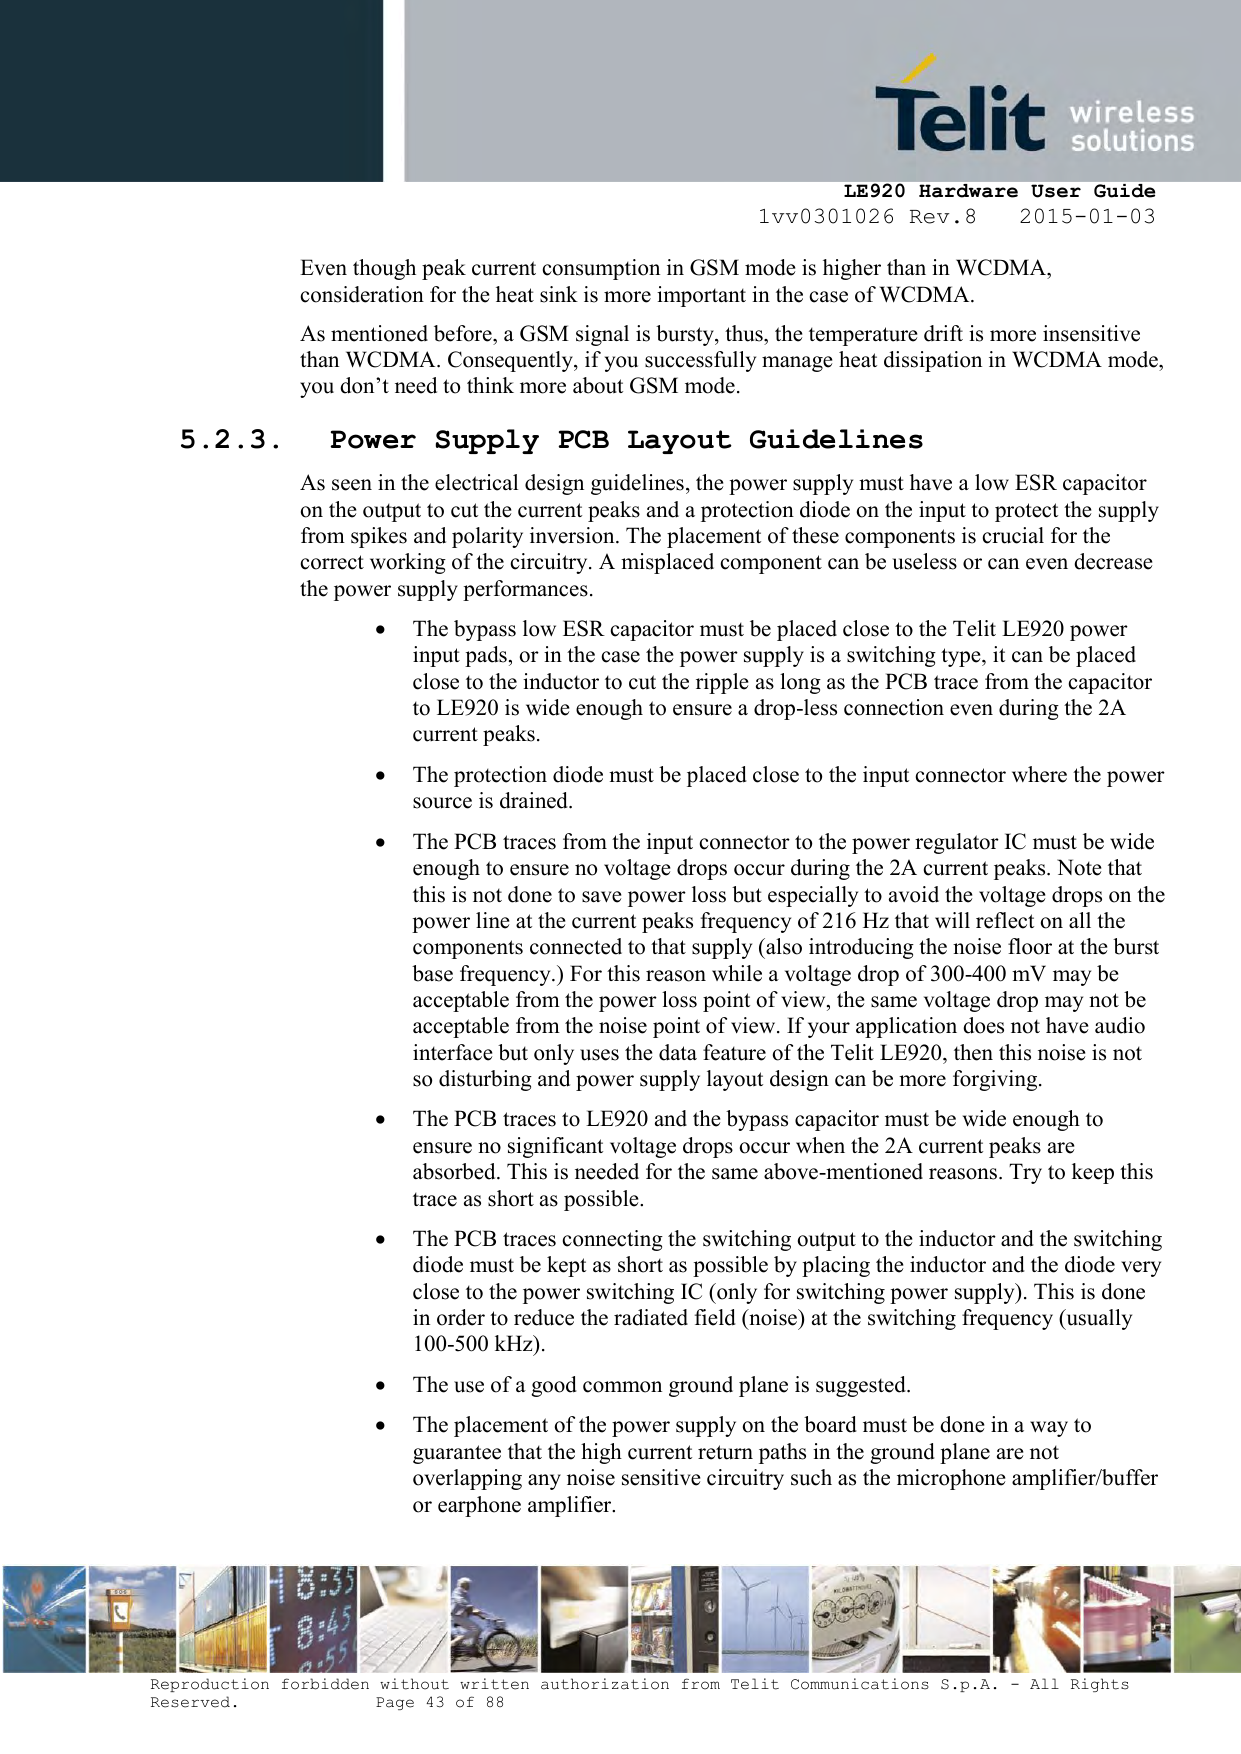     LE920 Hardware User Guide 1vv0301026 Rev.8   2015-01-03 Reproduction forbidden without written authorization from Telit Communications S.p.A. - All Rights Reserved.    Page 43 of 88  Even though peak current consumption in GSM mode is higher than in WCDMA, consideration for the heat sink is more important in the case of WCDMA. As mentioned before, a GSM signal is bursty, thus, the temperature drift is more insensitive than WCDMA. Consequently, if you successfully manage heat dissipation in WCDMA mode, you don’t need to think more about GSM mode. 5.2.3. Power Supply PCB Layout Guidelines As seen in the electrical design guidelines, the power supply must have a low ESR capacitor on the output to cut the current peaks and a protection diode on the input to protect the supply from spikes and polarity inversion. The placement of these components is crucial for the correct working of the circuitry. A misplaced component can be useless or can even decrease the power supply performances.  The bypass low ESR capacitor must be placed close to the Telit LE920 power input pads, or in the case the power supply is a switching type, it can be placed close to the inductor to cut the ripple as long as the PCB trace from the capacitor to LE920 is wide enough to ensure a drop-less connection even during the 2A current peaks.  The protection diode must be placed close to the input connector where the power source is drained.  The PCB traces from the input connector to the power regulator IC must be wide enough to ensure no voltage drops occur during the 2A current peaks. Note that this is not done to save power loss but especially to avoid the voltage drops on the power line at the current peaks frequency of 216 Hz that will reflect on all the components connected to that supply (also introducing the noise floor at the burst base frequency.) For this reason while a voltage drop of 300-400 mV may be acceptable from the power loss point of view, the same voltage drop may not be acceptable from the noise point of view. If your application does not have audio interface but only uses the data feature of the Telit LE920, then this noise is not so disturbing and power supply layout design can be more forgiving.  The PCB traces to LE920 and the bypass capacitor must be wide enough to ensure no significant voltage drops occur when the 2A current peaks are absorbed. This is needed for the same above-mentioned reasons. Try to keep this trace as short as possible.  The PCB traces connecting the switching output to the inductor and the switching diode must be kept as short as possible by placing the inductor and the diode very close to the power switching IC (only for switching power supply). This is done in order to reduce the radiated field (noise) at the switching frequency (usually 100-500 kHz).  The use of a good common ground plane is suggested.  The placement of the power supply on the board must be done in a way to guarantee that the high current return paths in the ground plane are not overlapping any noise sensitive circuitry such as the microphone amplifier/buffer or earphone amplifier. 